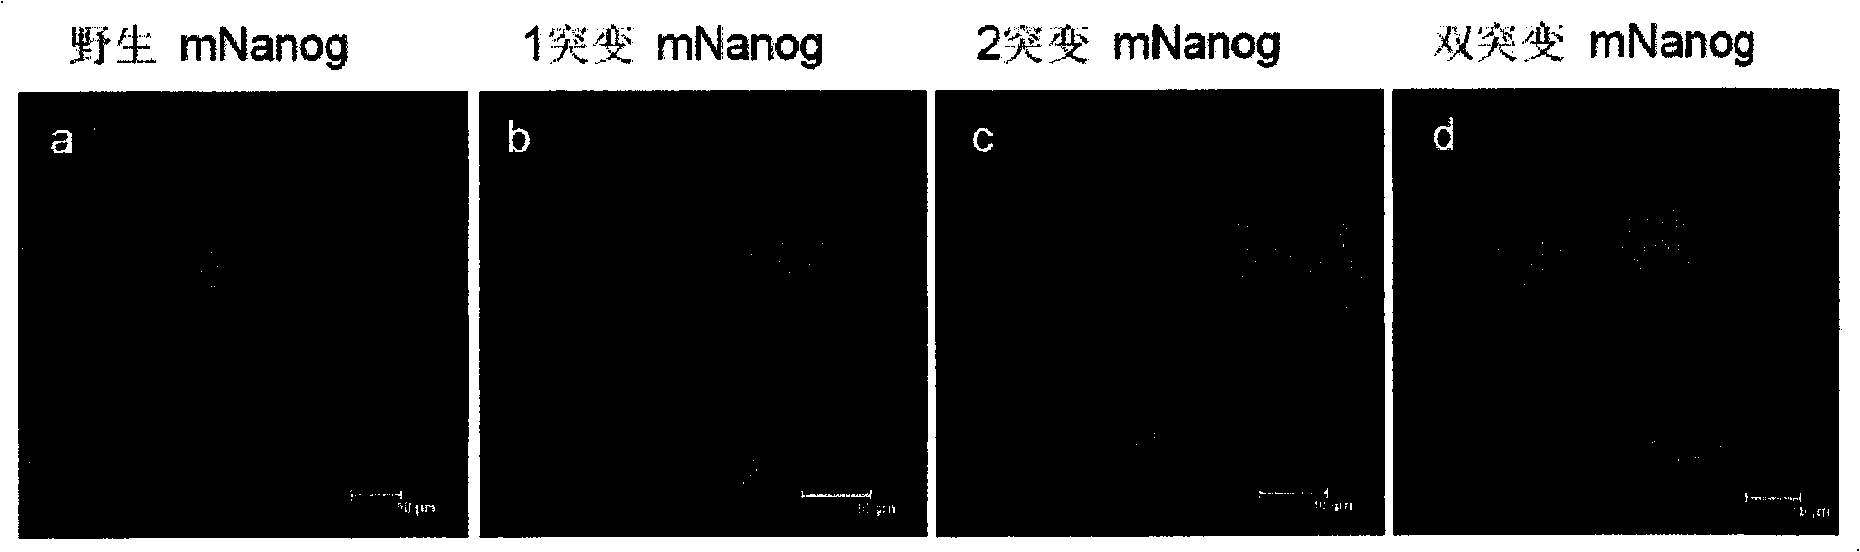 Nanog inhibitory type mutant and uses in Nanog function research